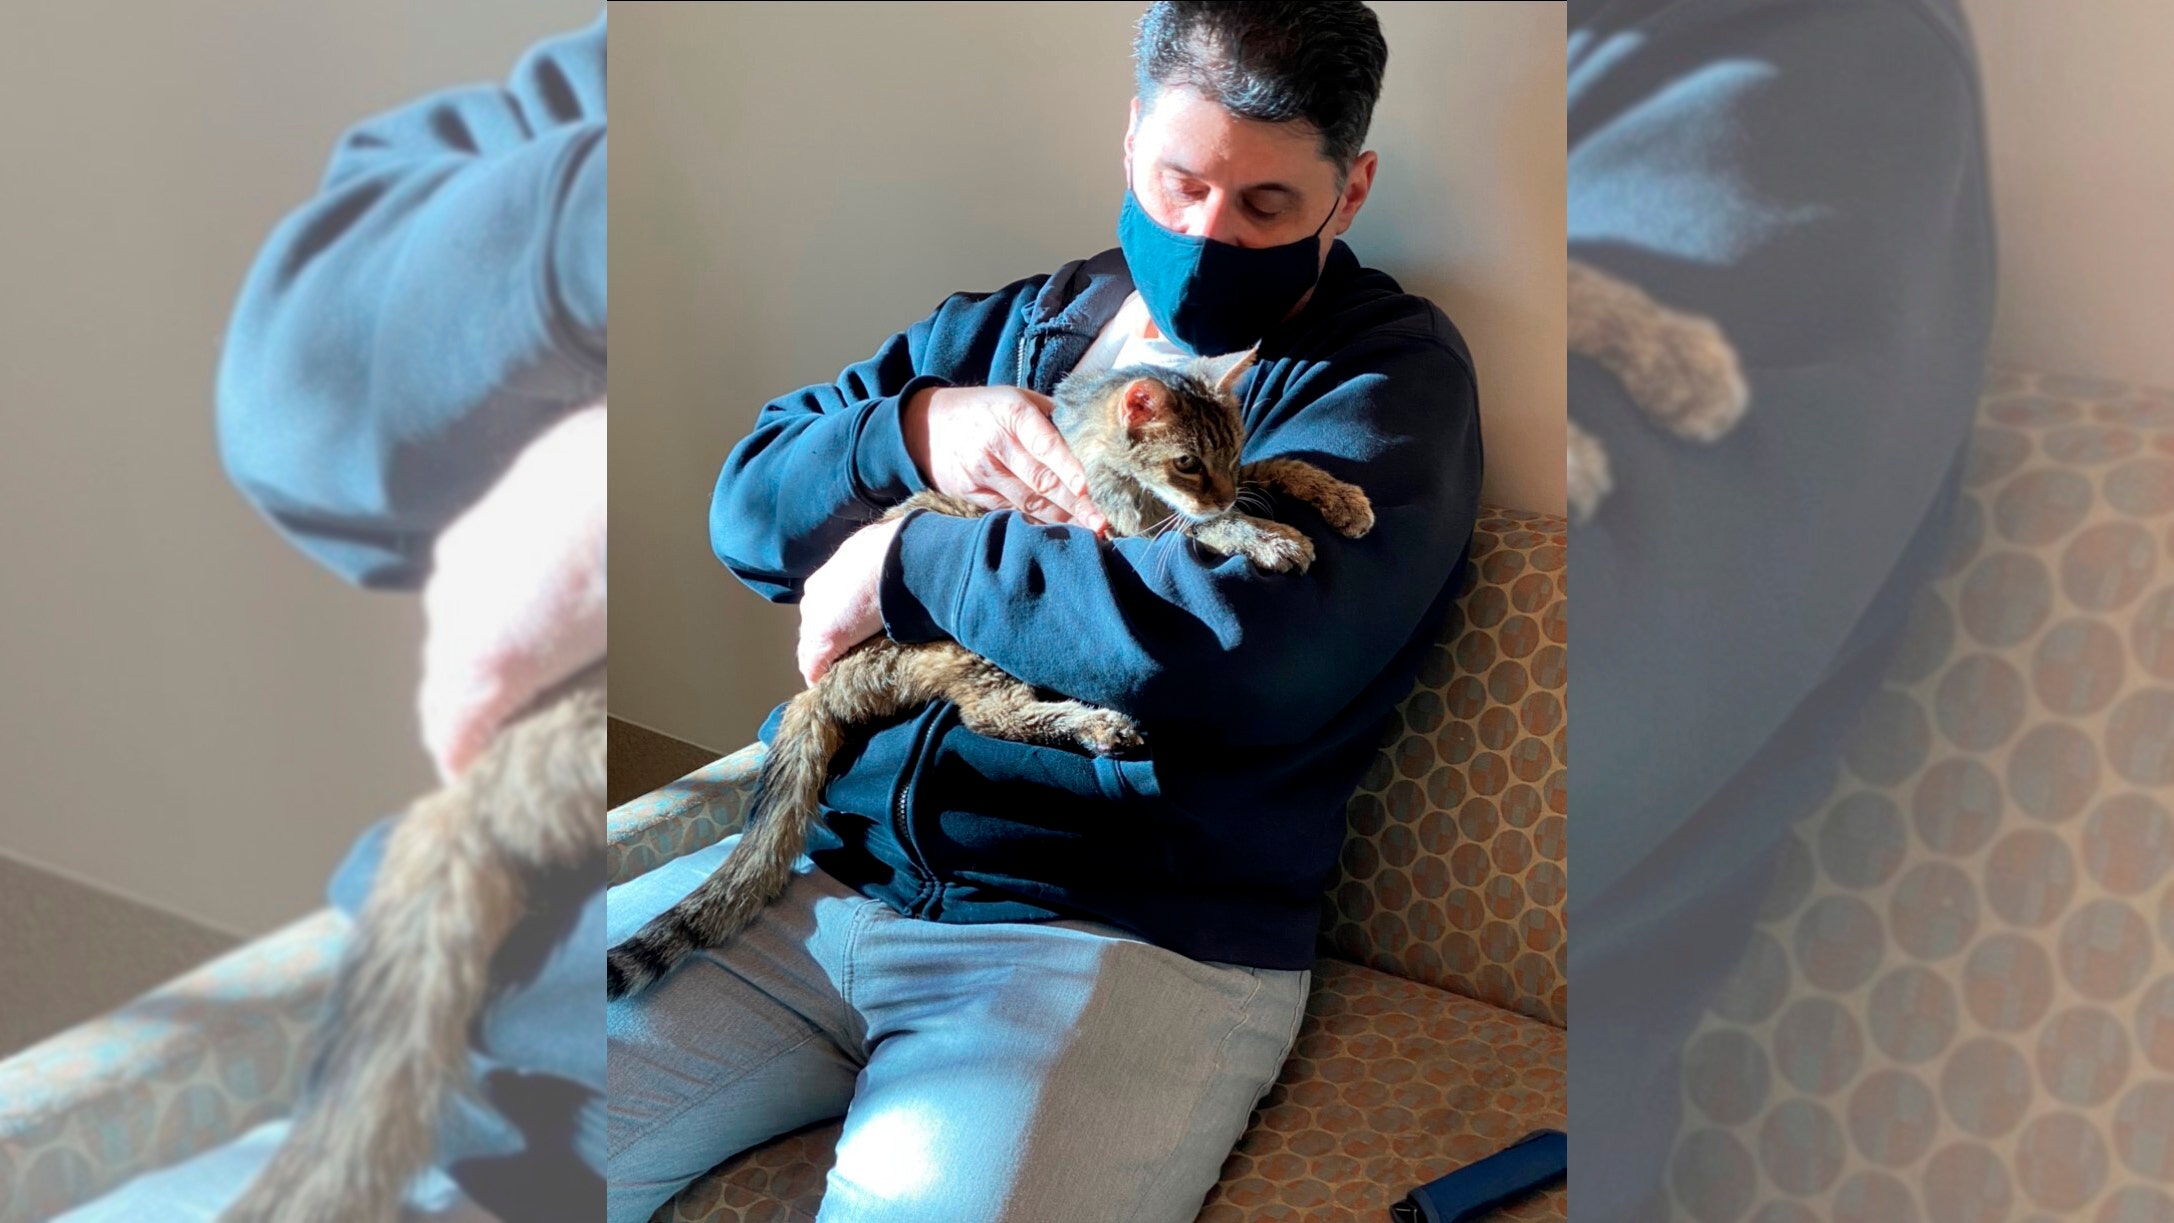 Man united with cat after it vanished 15 years ago: 'It was very emotional'